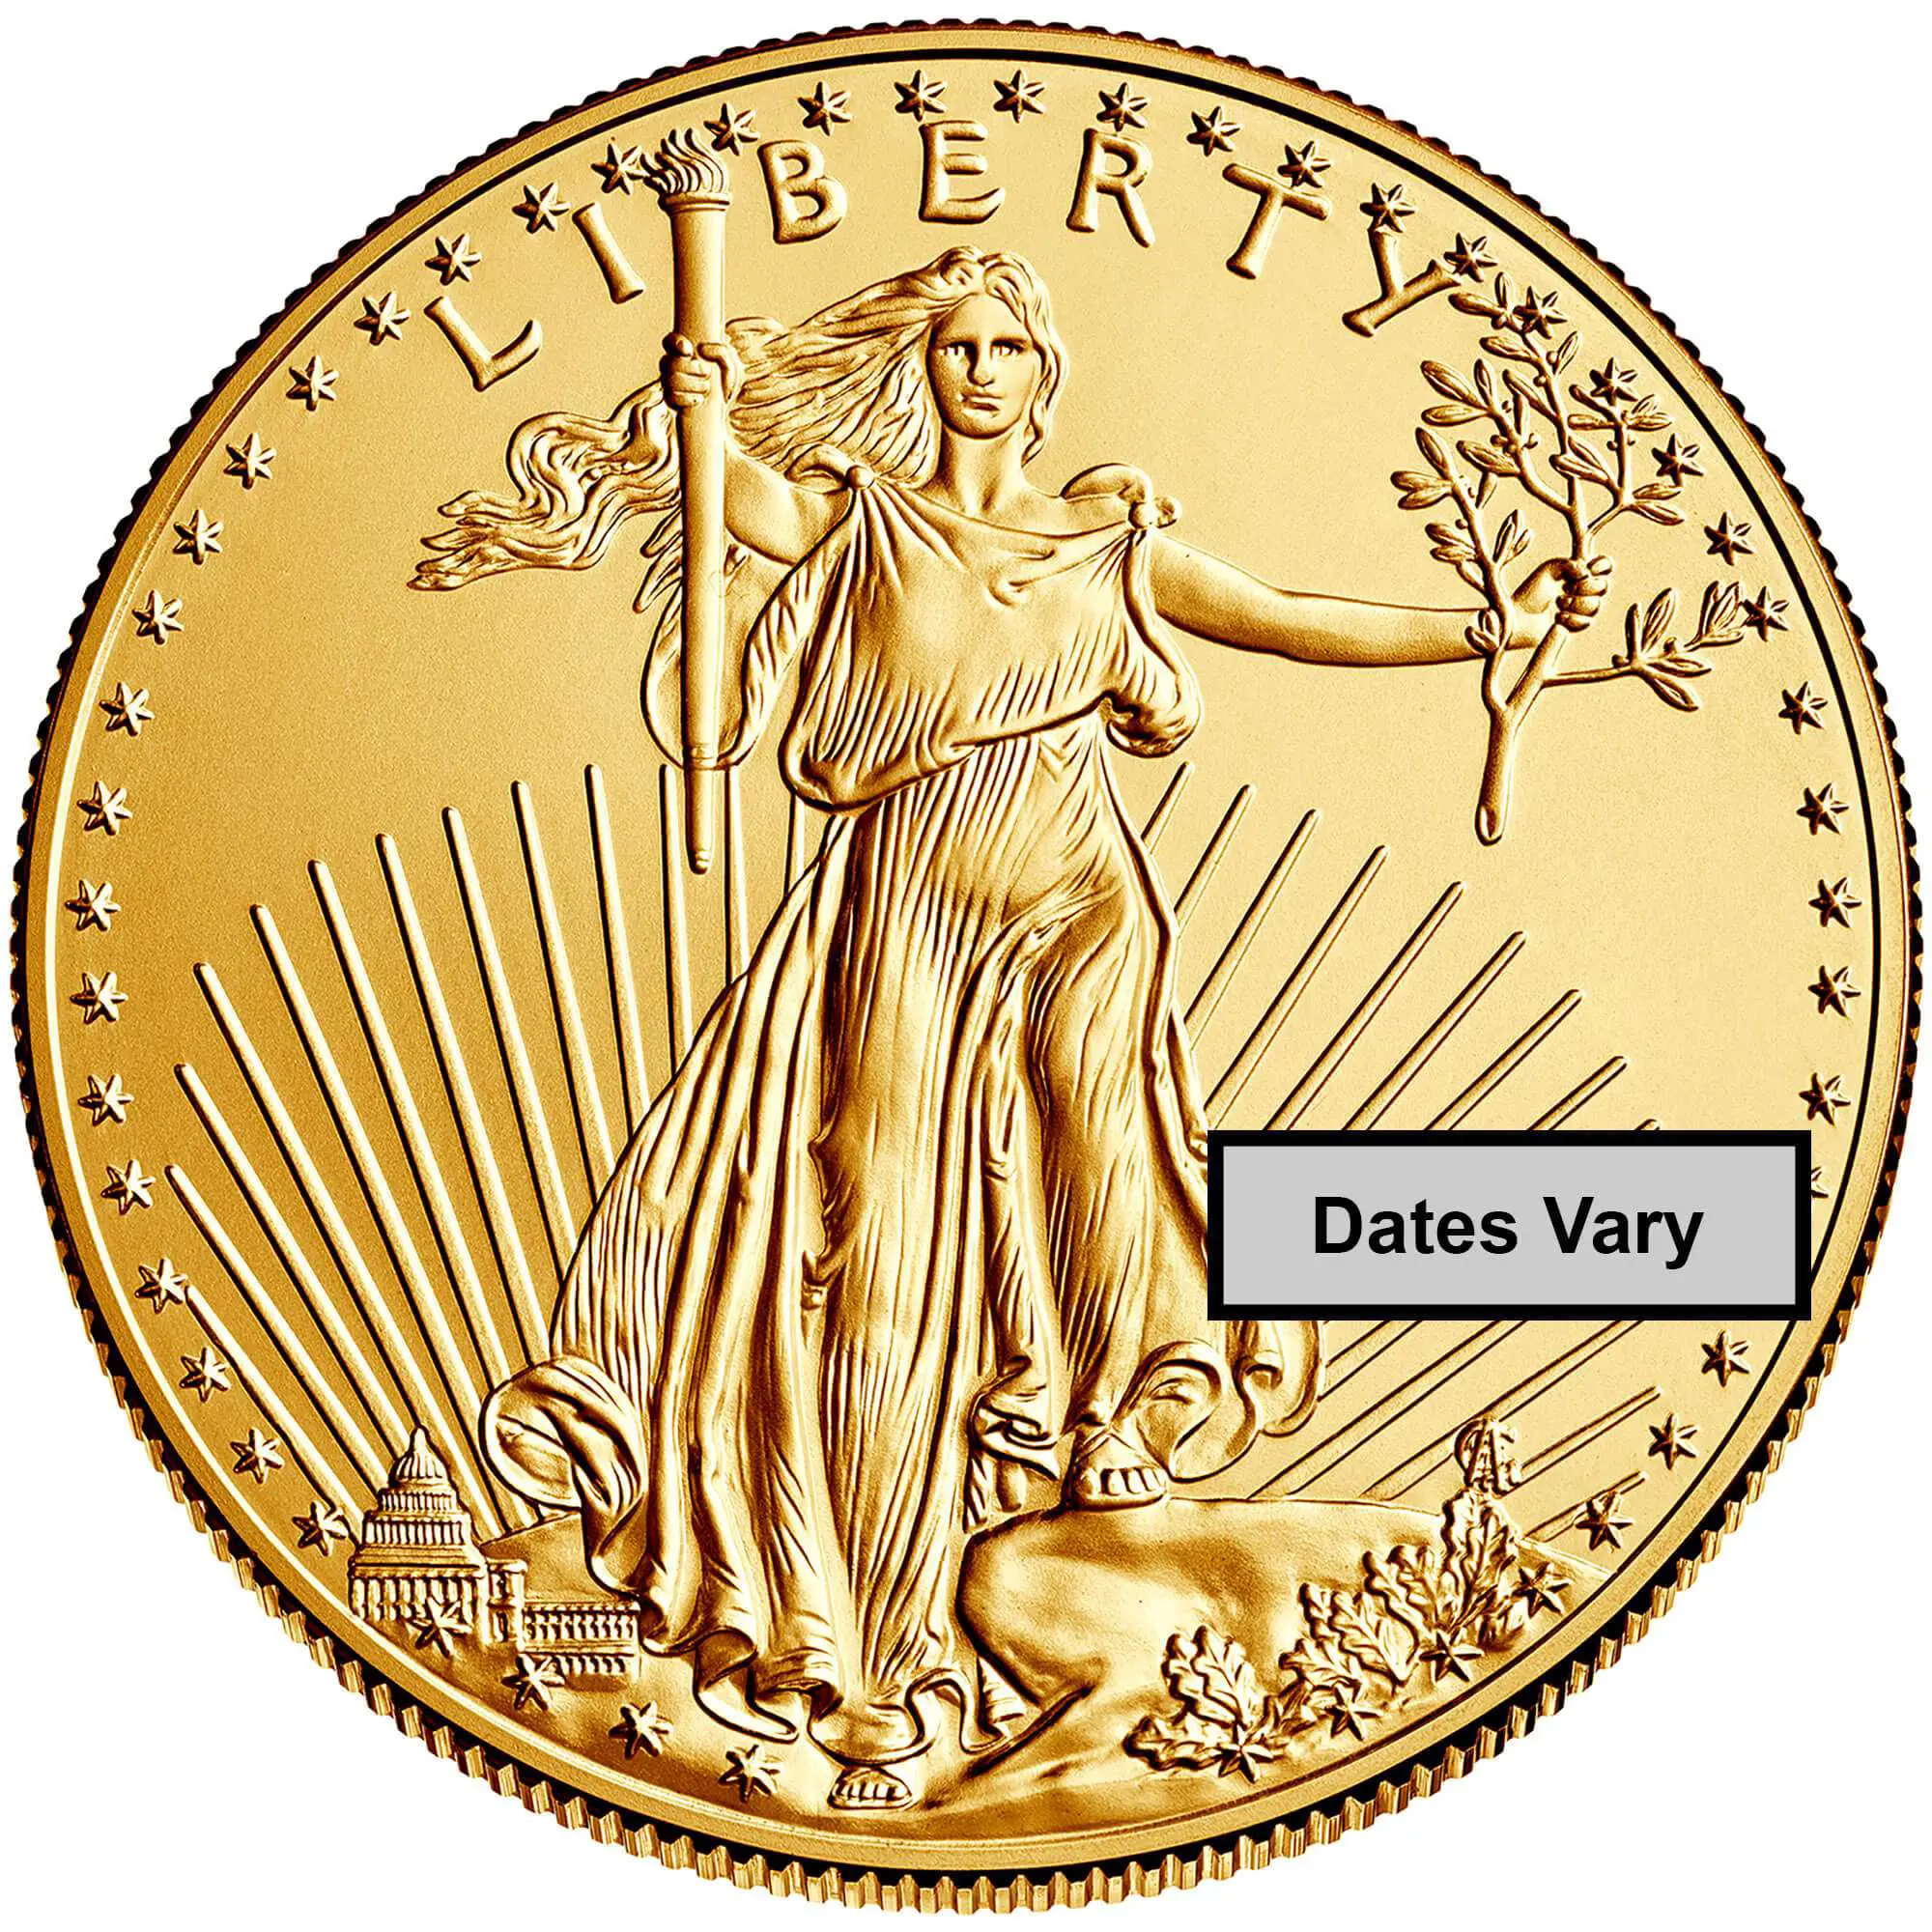 1 oz American Gold Eagle Coin (BU, Dates Vary)